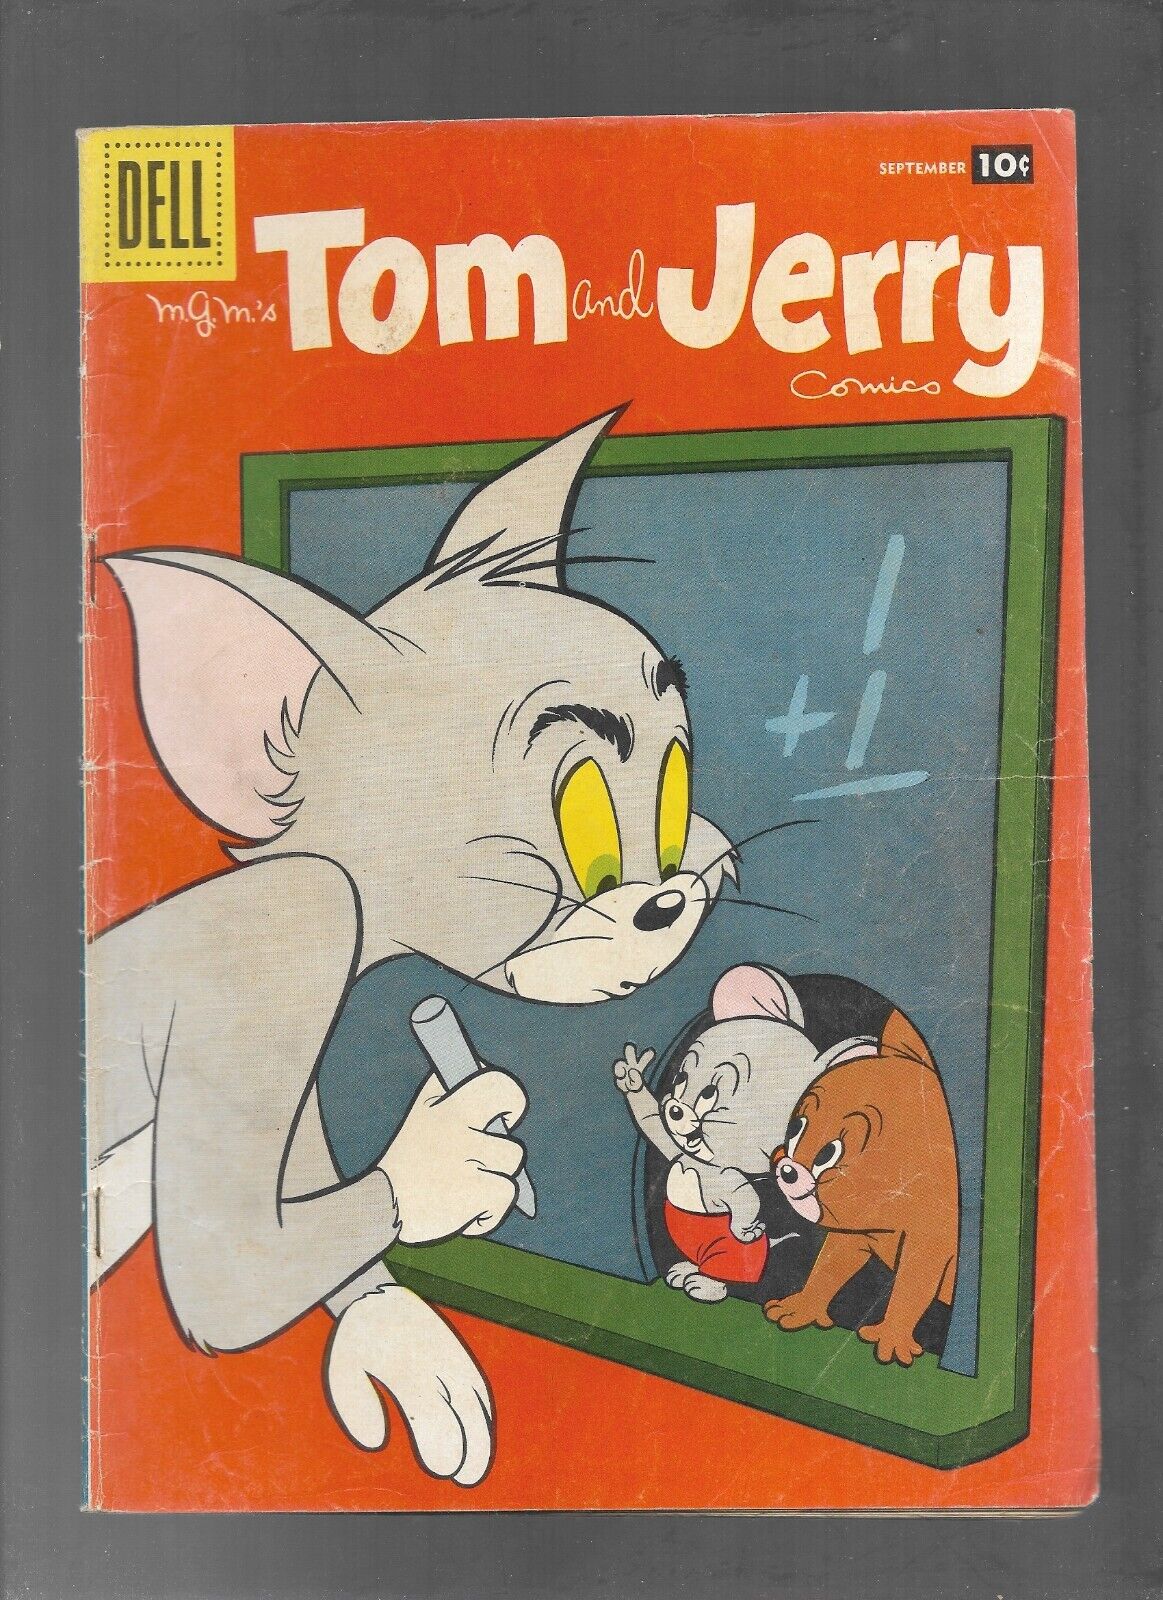 TOM AND JERRY #158 SEPT.1957 DELL COMICS Spike & Tyke Barney Bear